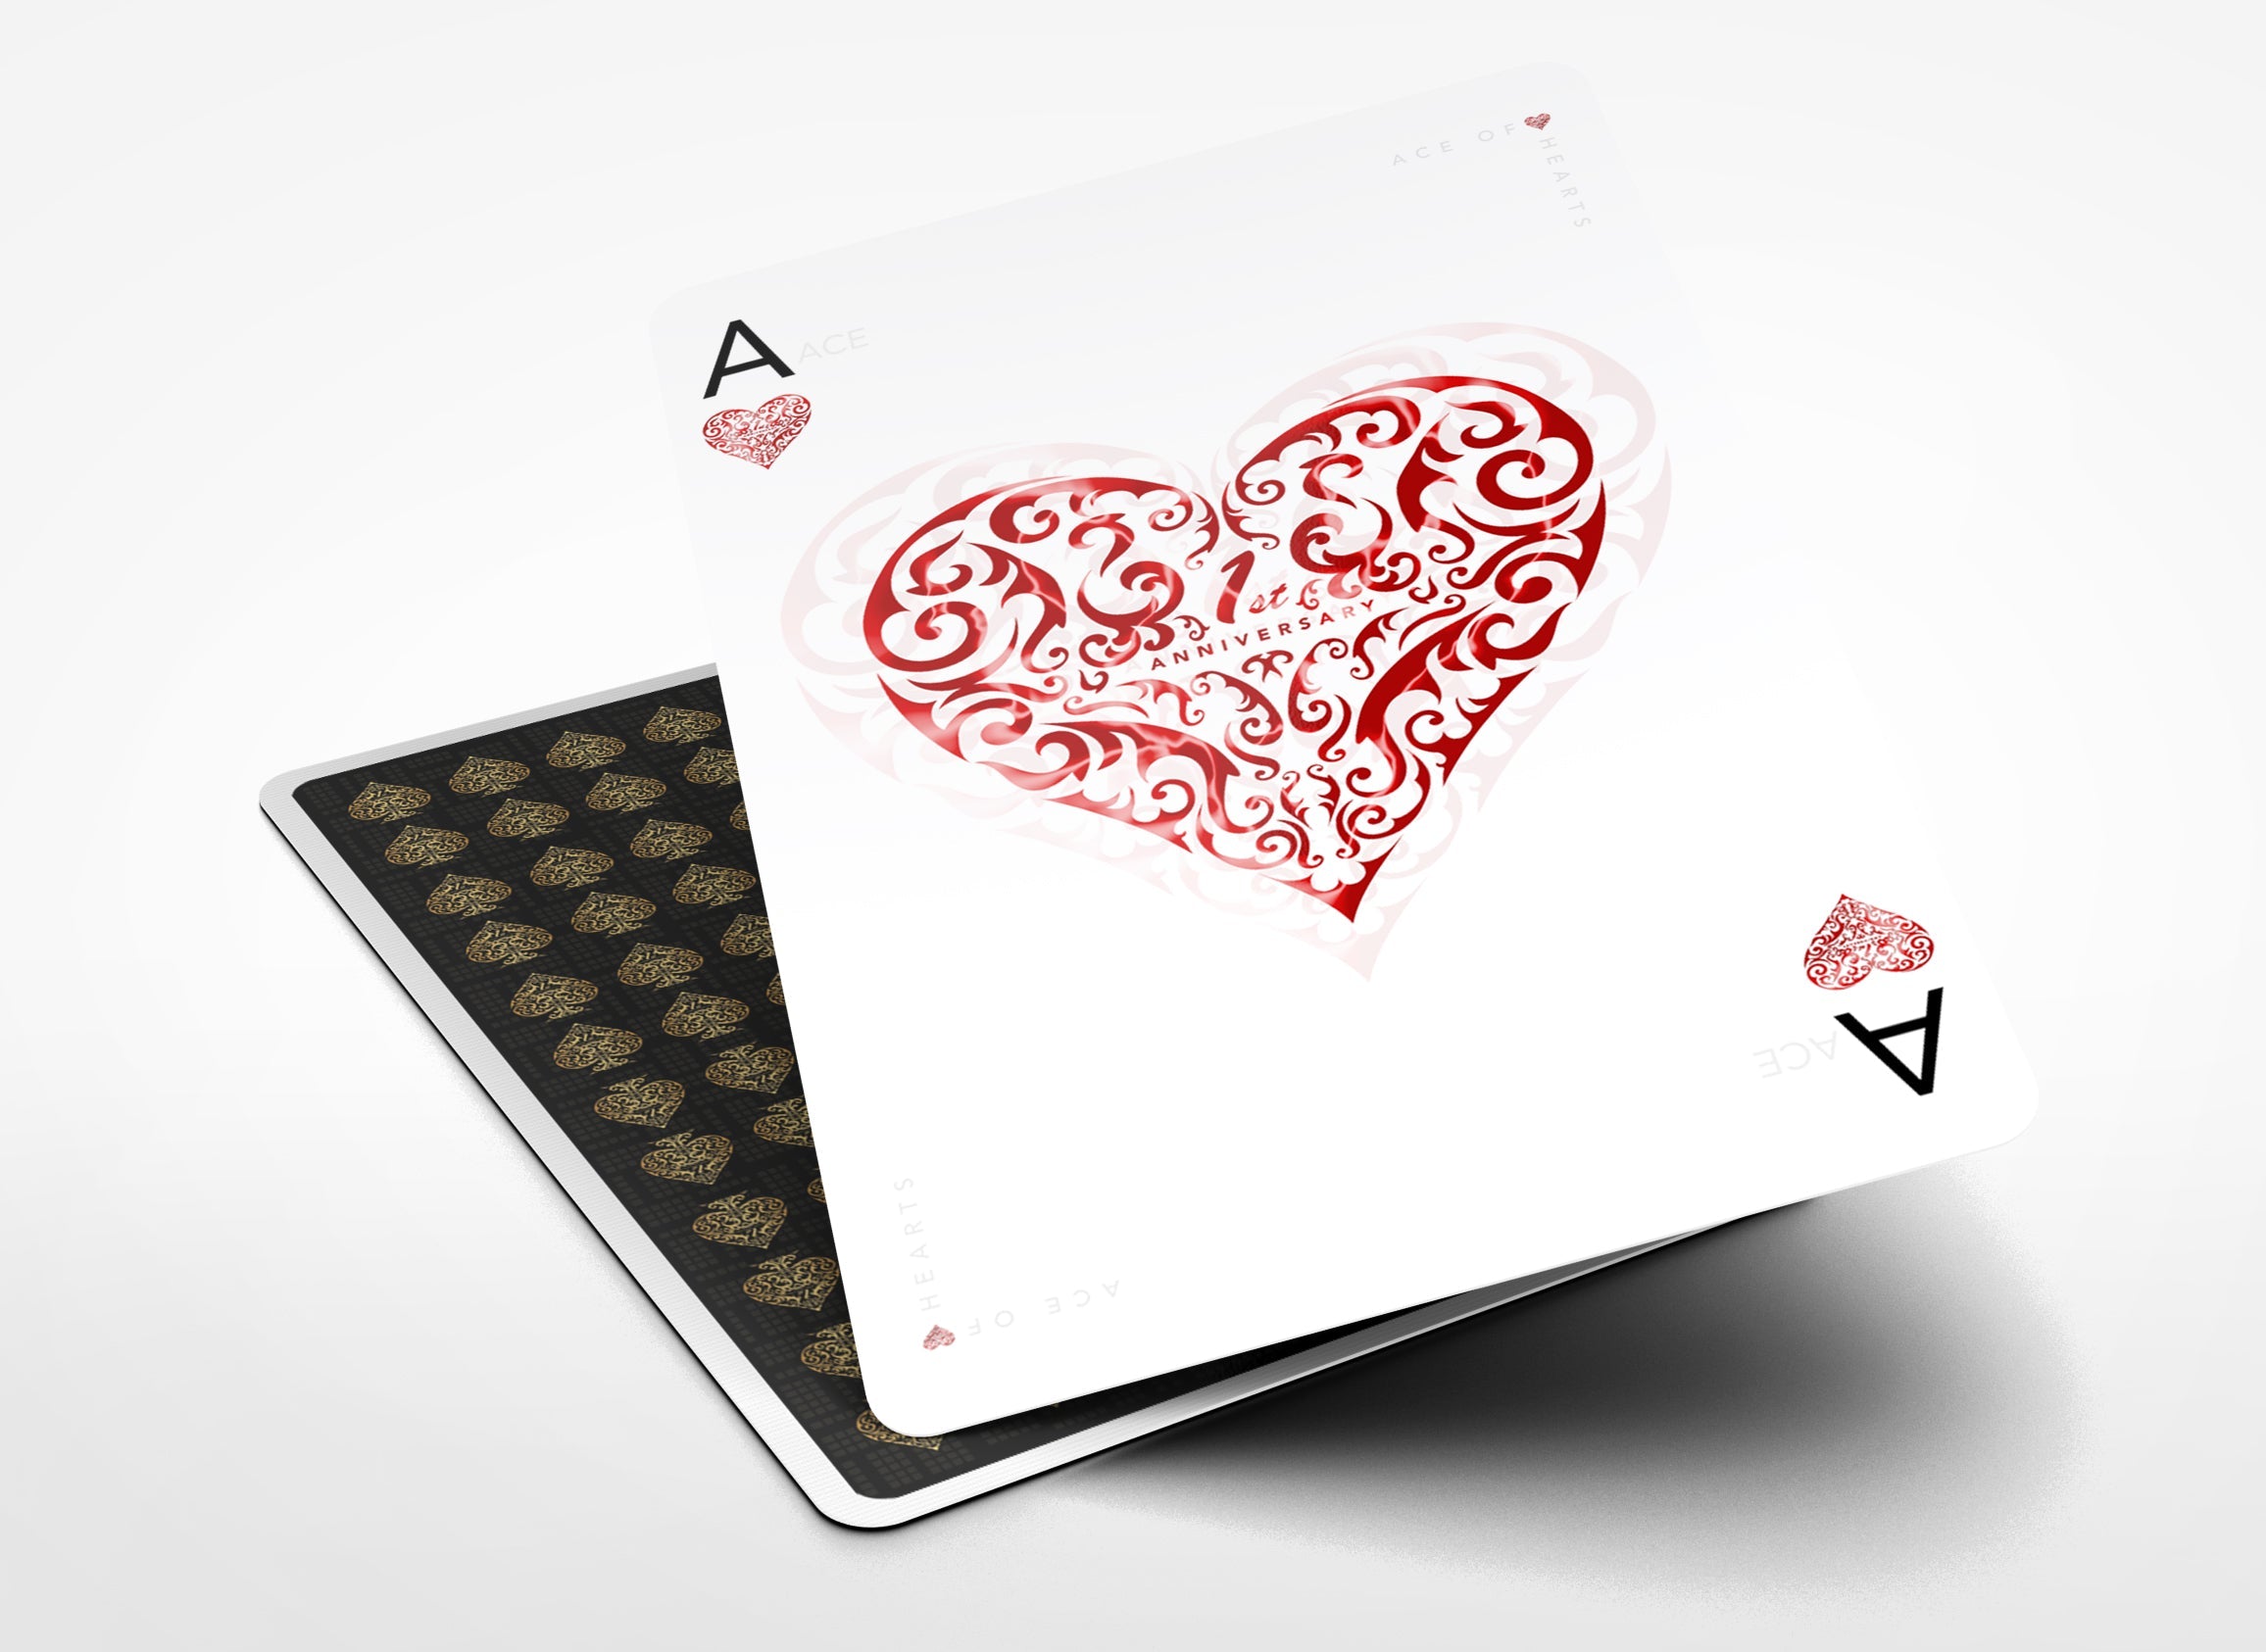 The Game of Spades 1st Anniversary "Expert" Deck, Spades deck, cards, playing cards, limited edition